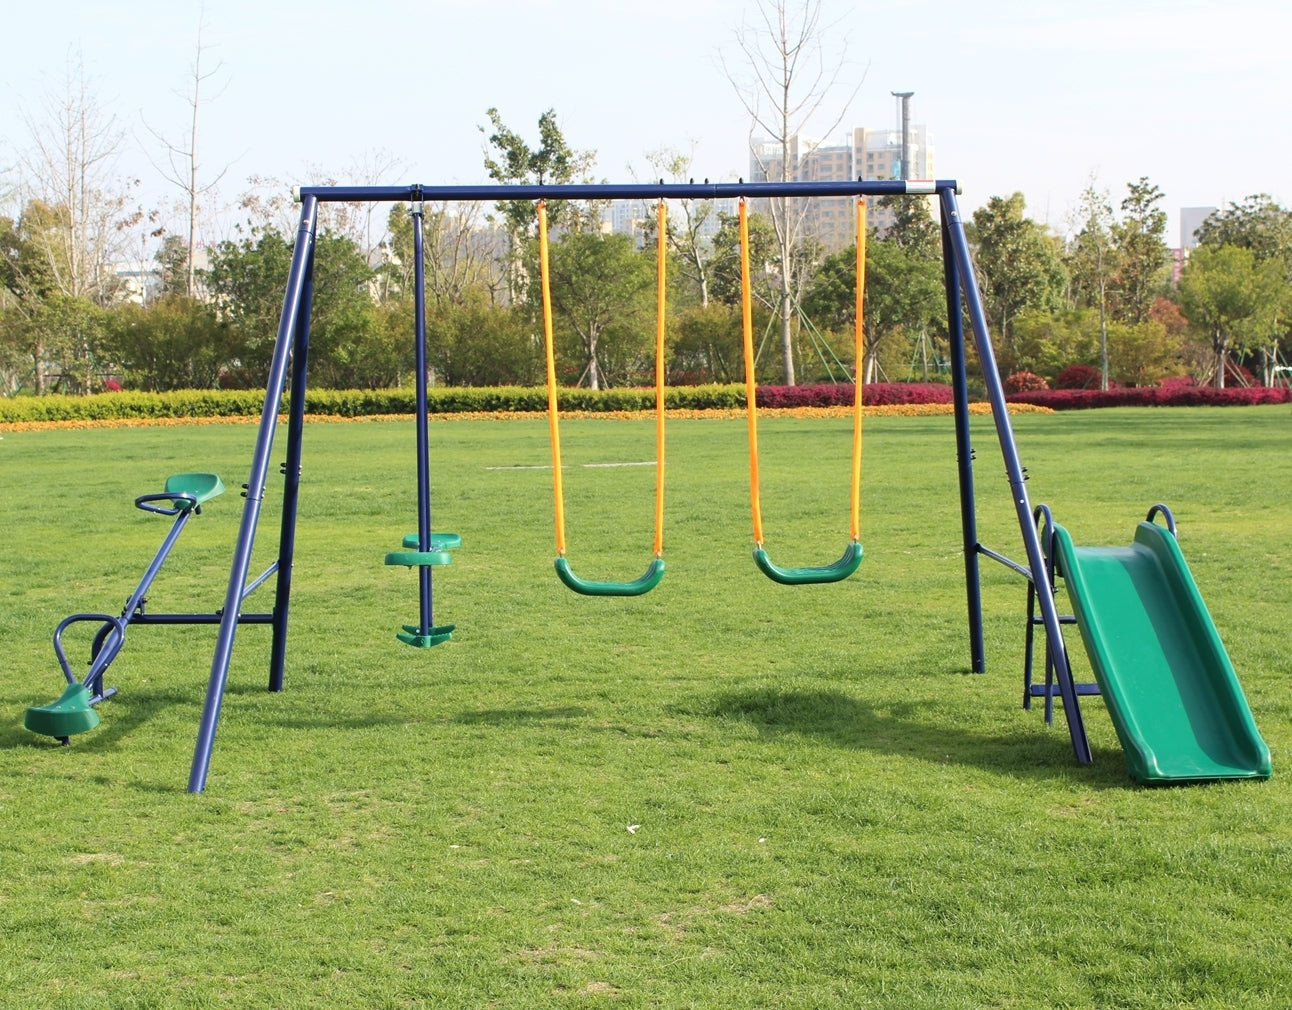 Metal Swing Set with Slide: Blue and Green Finish - Outdoor Playground Equipment